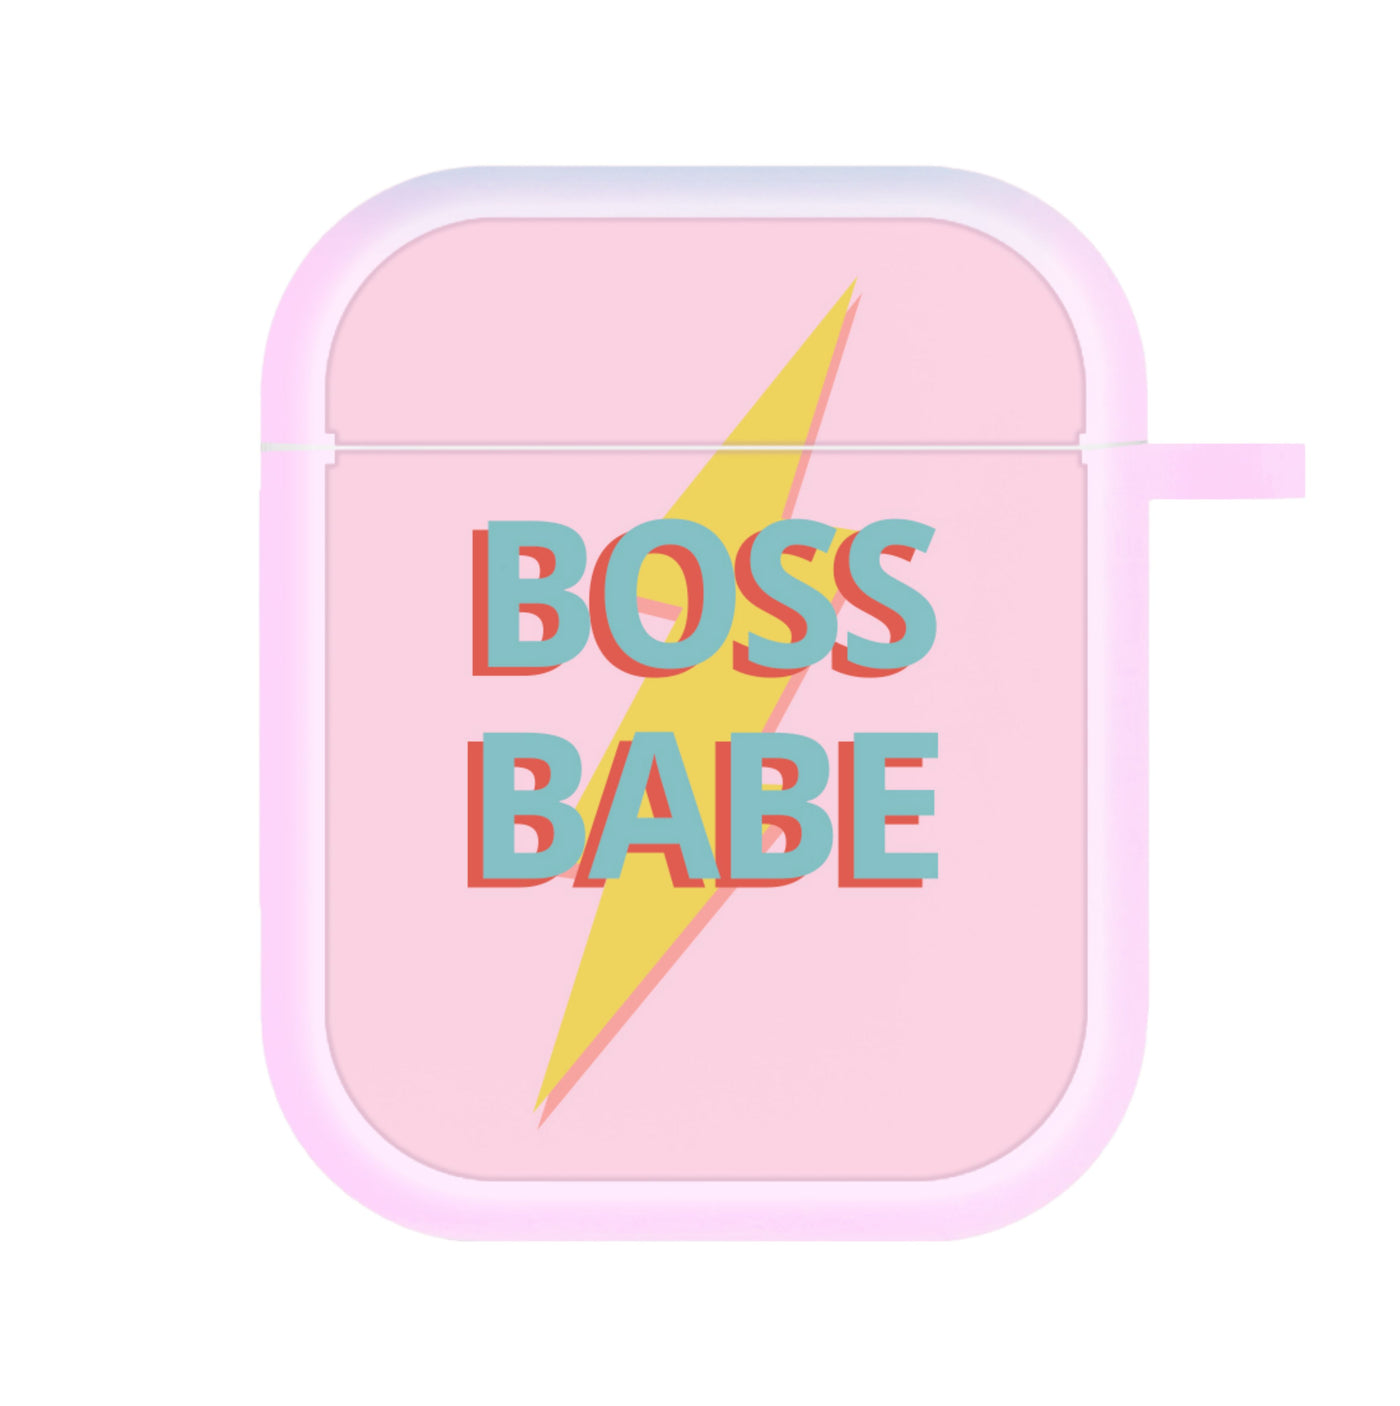 Boss Babe AirPods Case